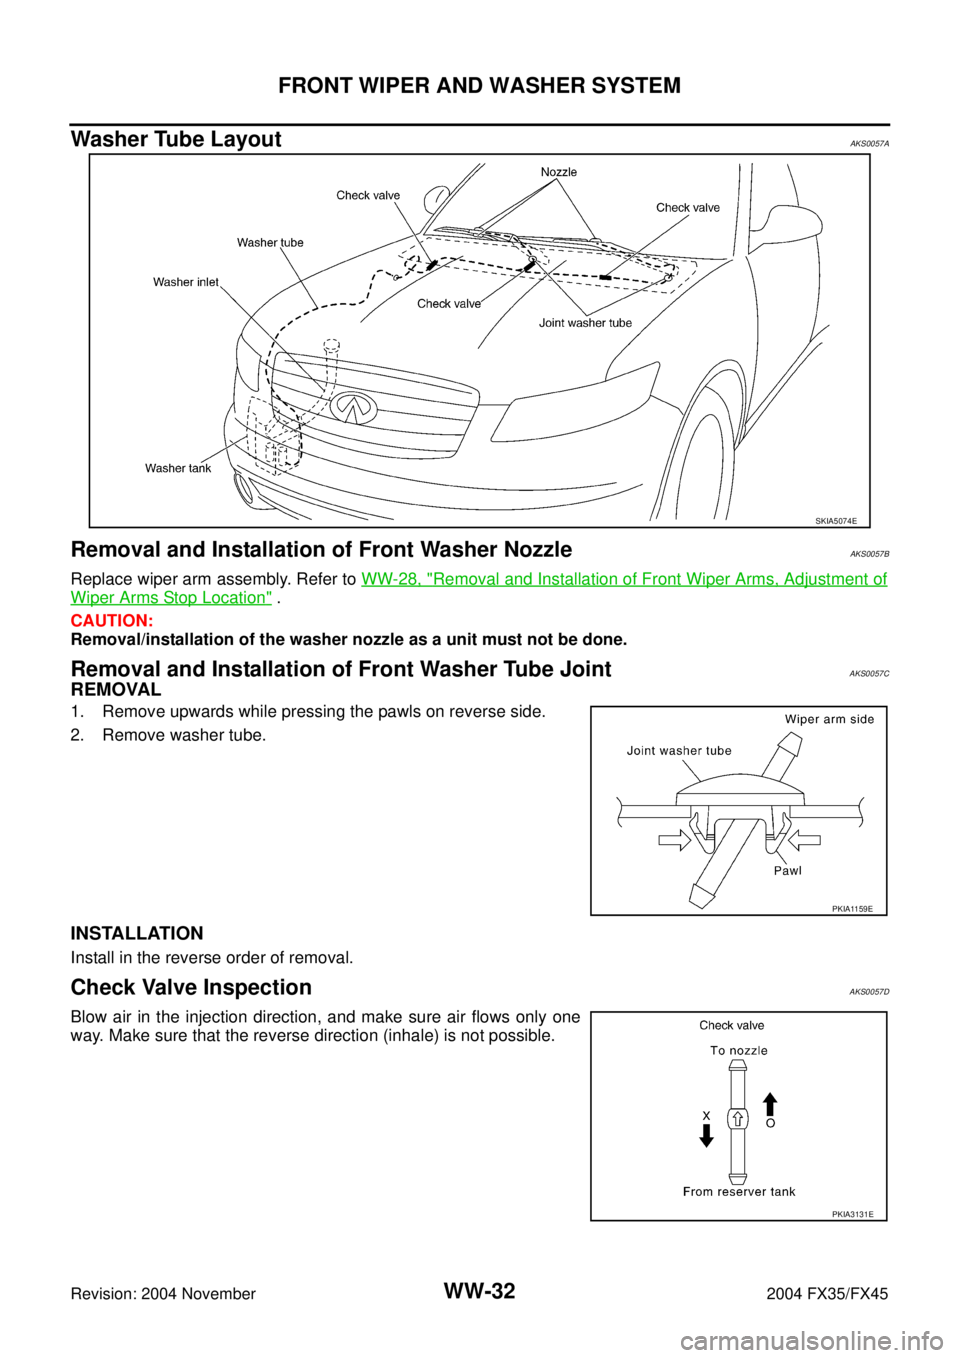 INFINITI FX35 2004  Service Manual WW-32
FRONT WIPER AND WASHER SYSTEM
Revision: 2004 November 2004 FX35/FX45
Washer Tube LayoutAKS0057A
Removal and Installation of Front Washer NozzleAKS0057B
Replace wiper arm assembly. Refer to WW-28